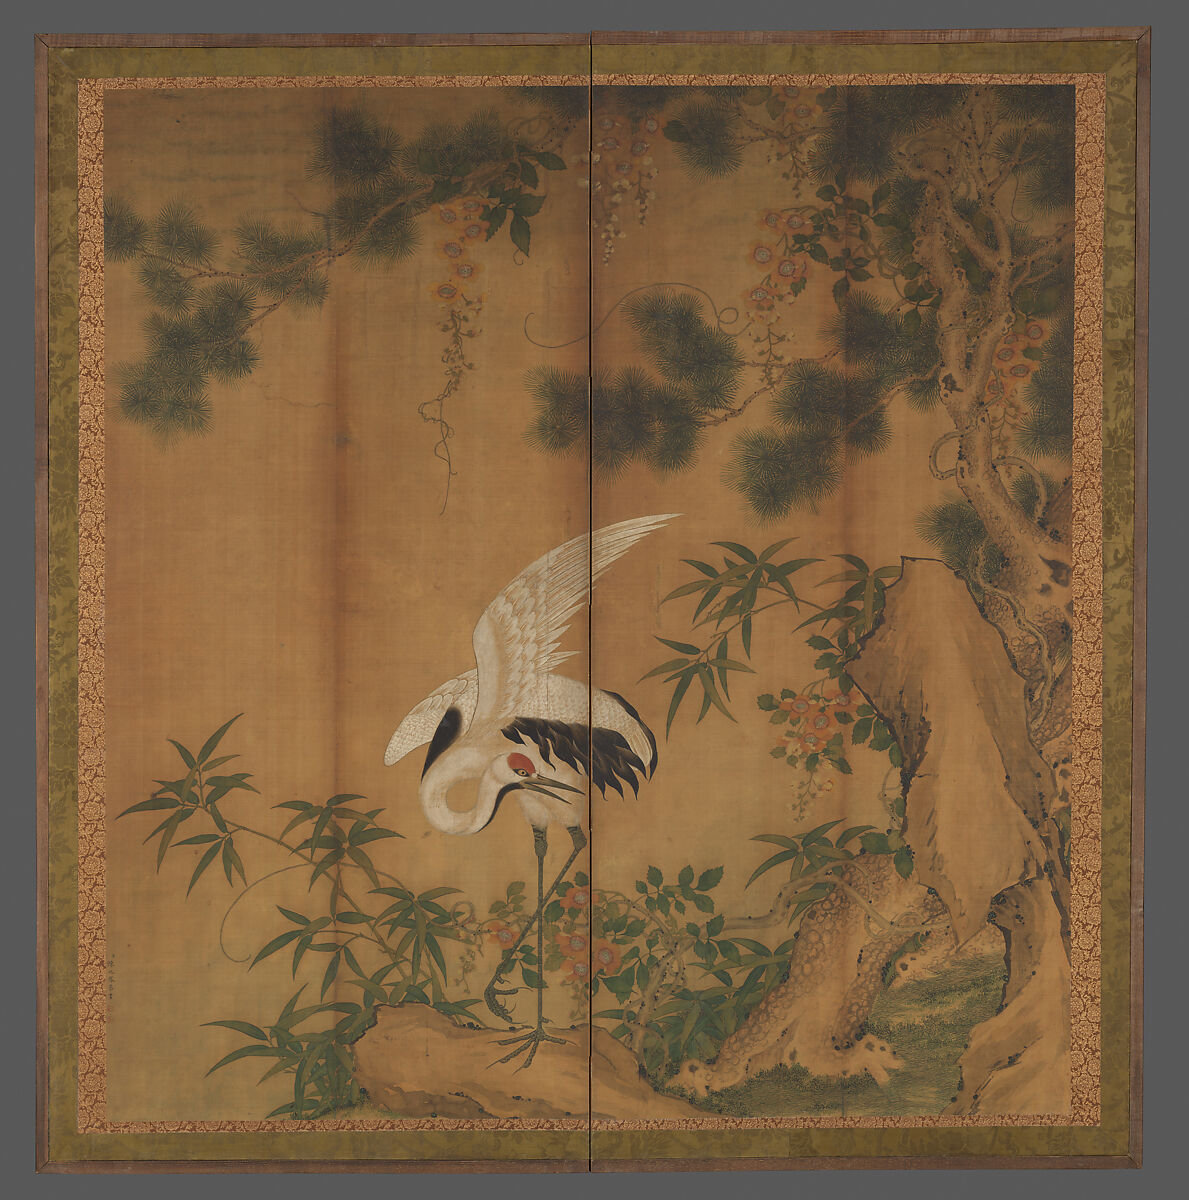 Crane, pine, and rock, Chen Zhaofeng, Set of four hanging scrolls mounted on a Japanese bi-fold screen; ink and color on silk, China